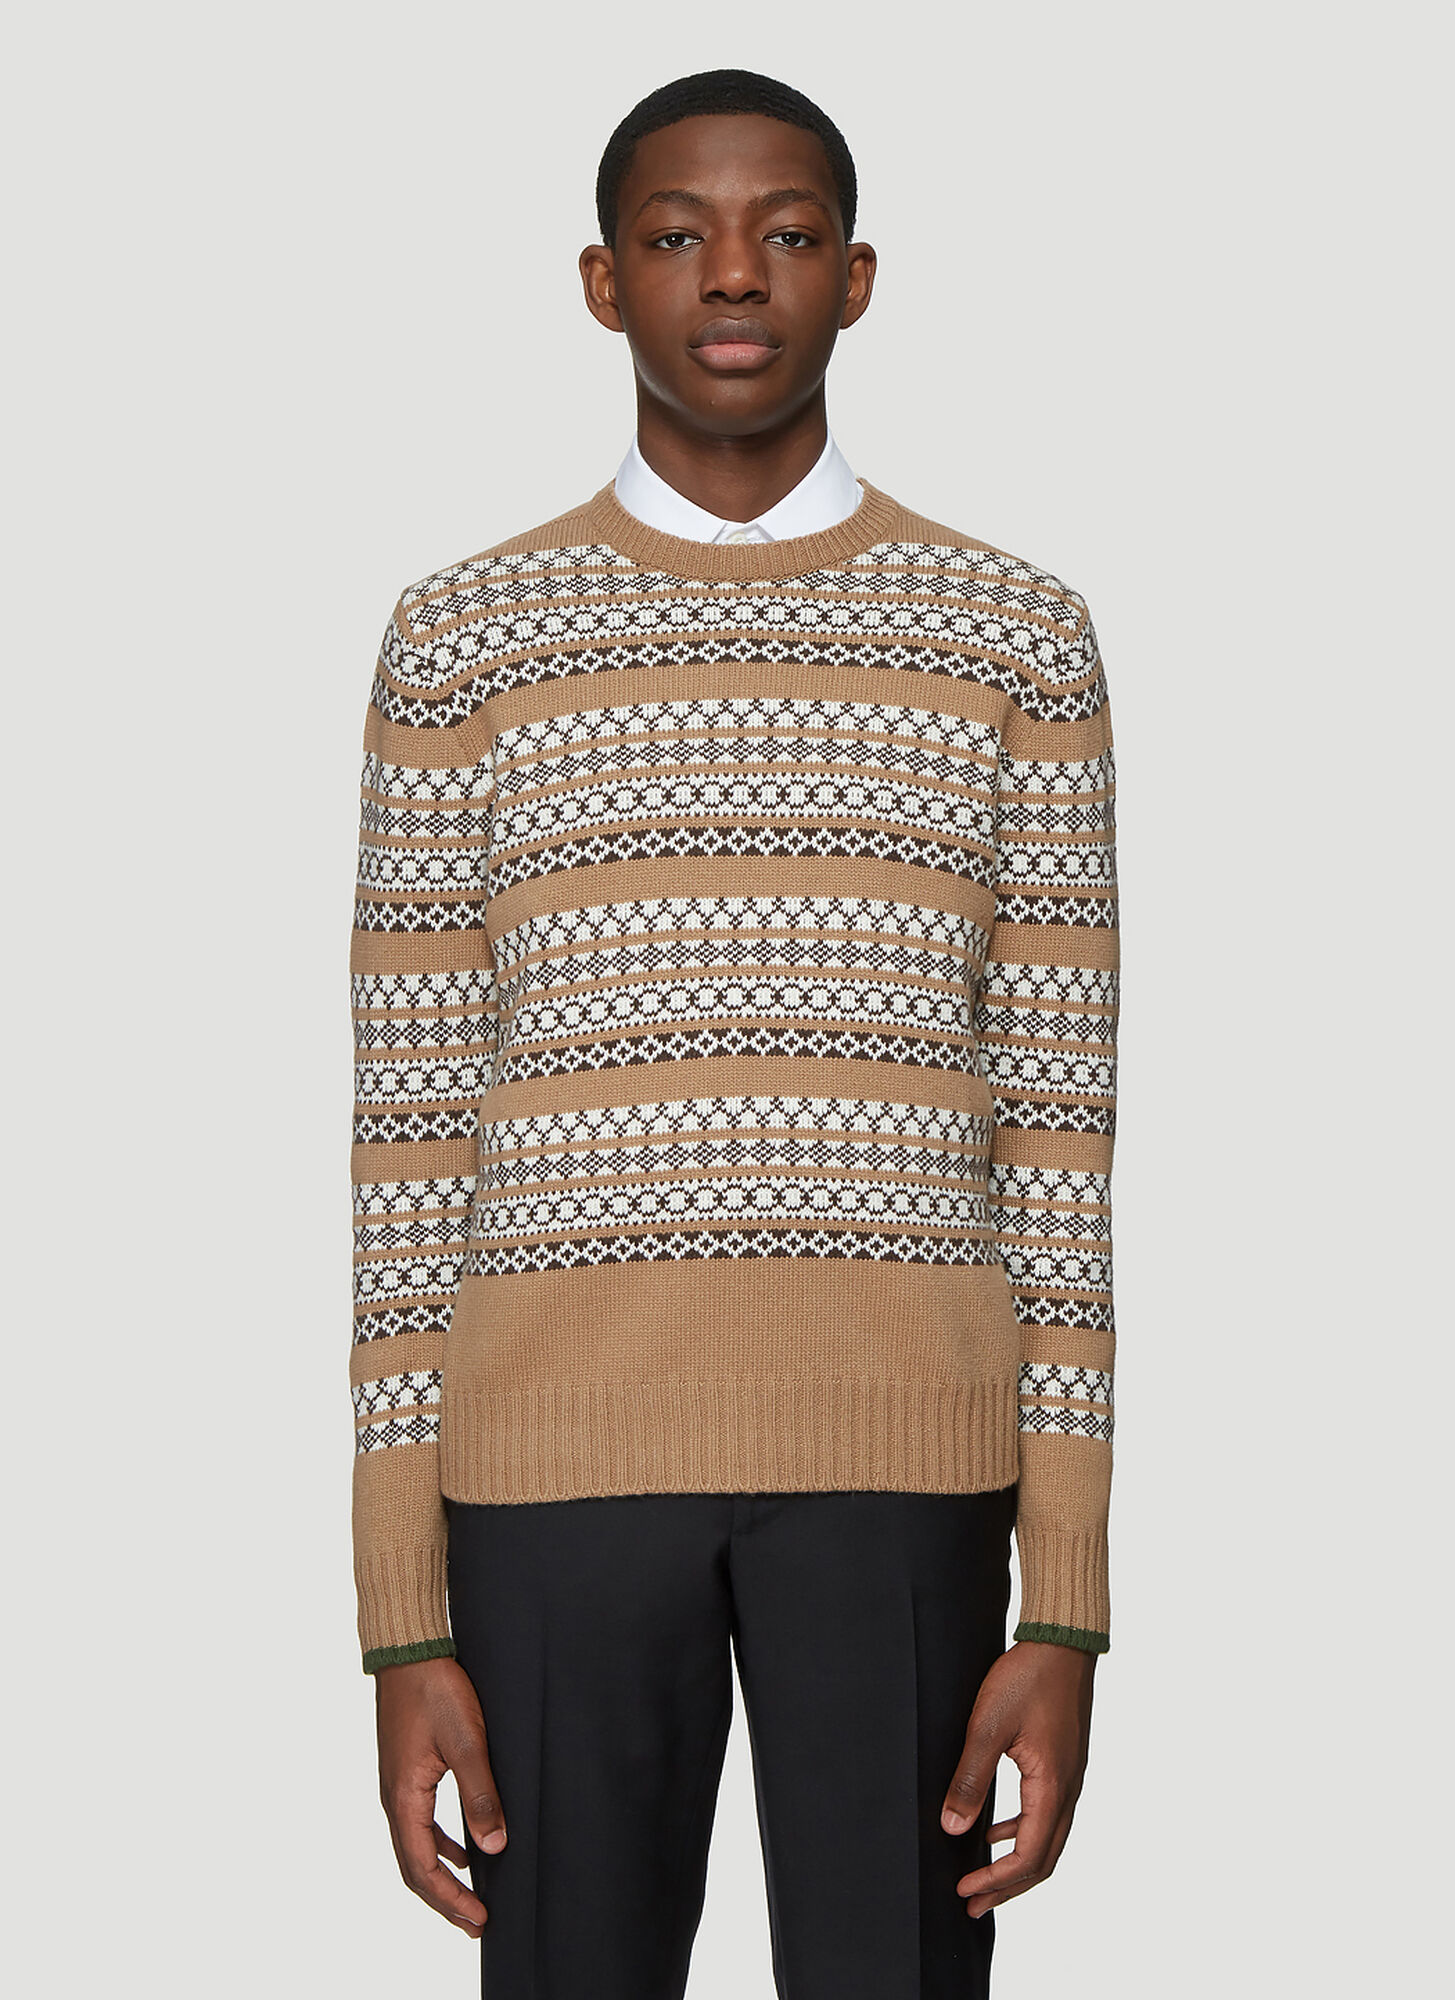 Prada Pattern Knit Sweater in Brown size IT – 48 | The Fashionisto